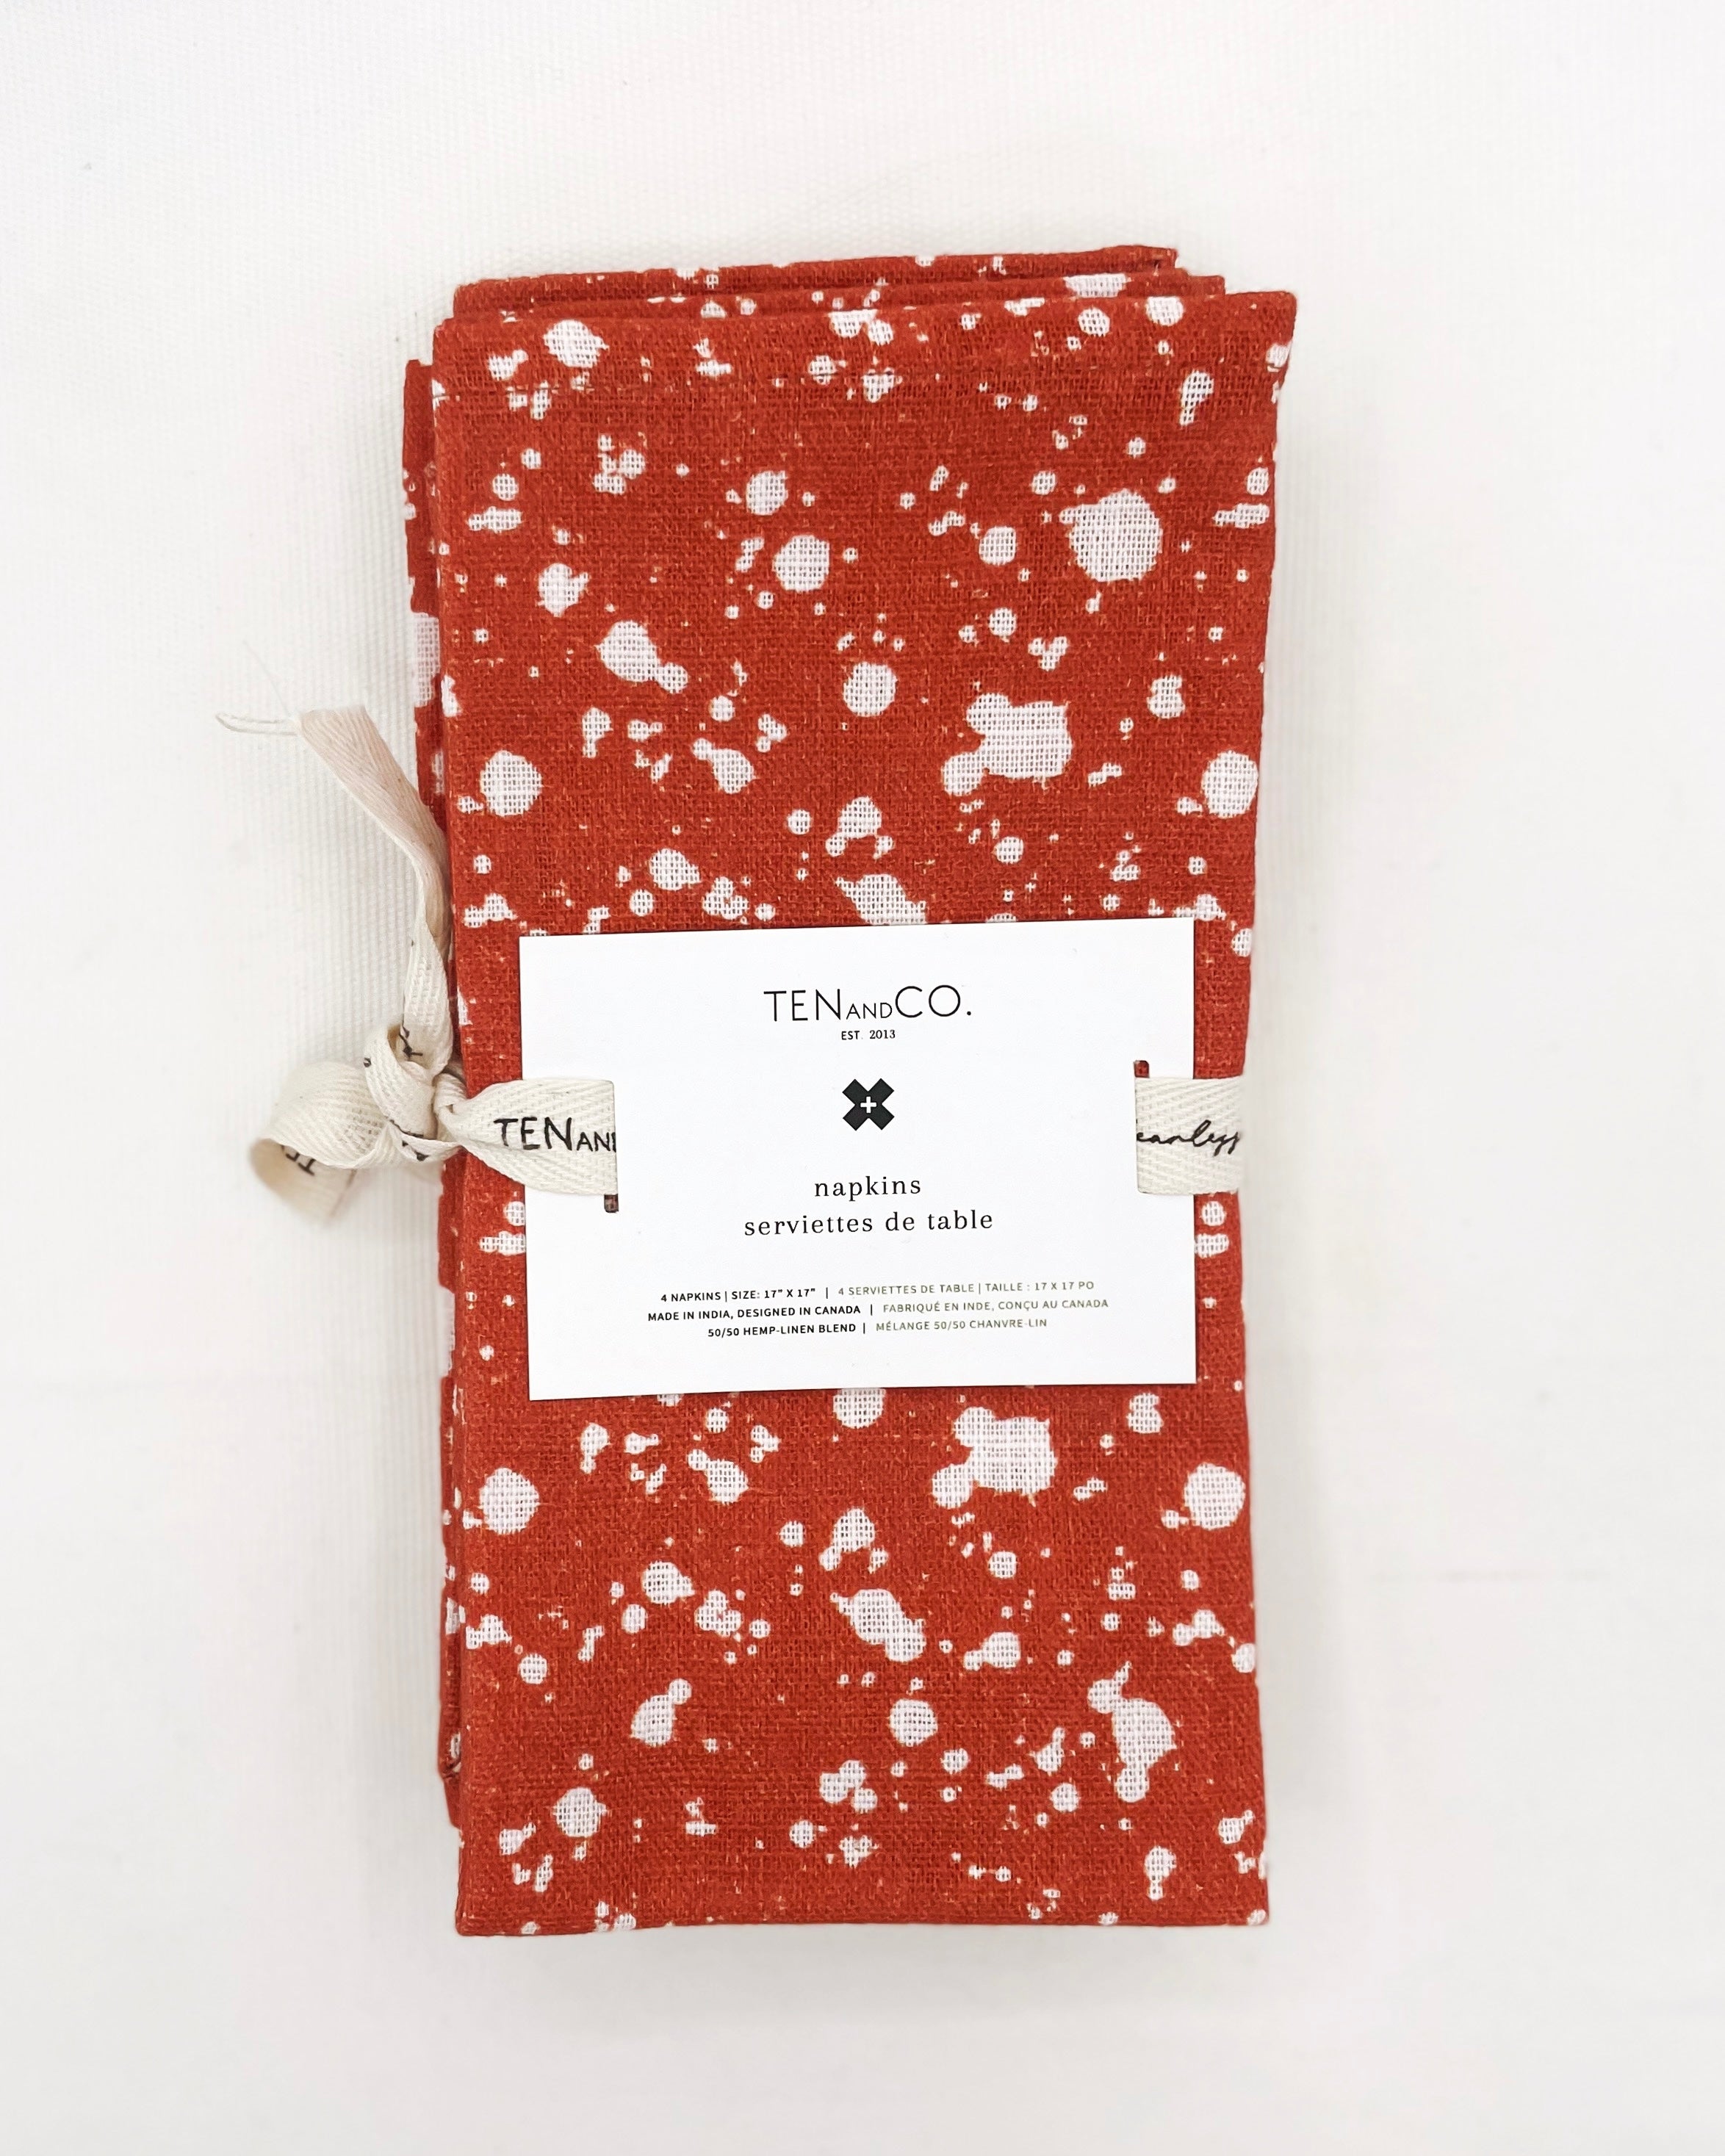 Flat lay image of Everyday Napkins Set of 4, Splatter – Rust on a white background. The napkins have a deep orange base colour with splatters of white covering the entirety of the cloth and are tied together with Ten and Co twill tape and a recyclable paper tag laying on top.